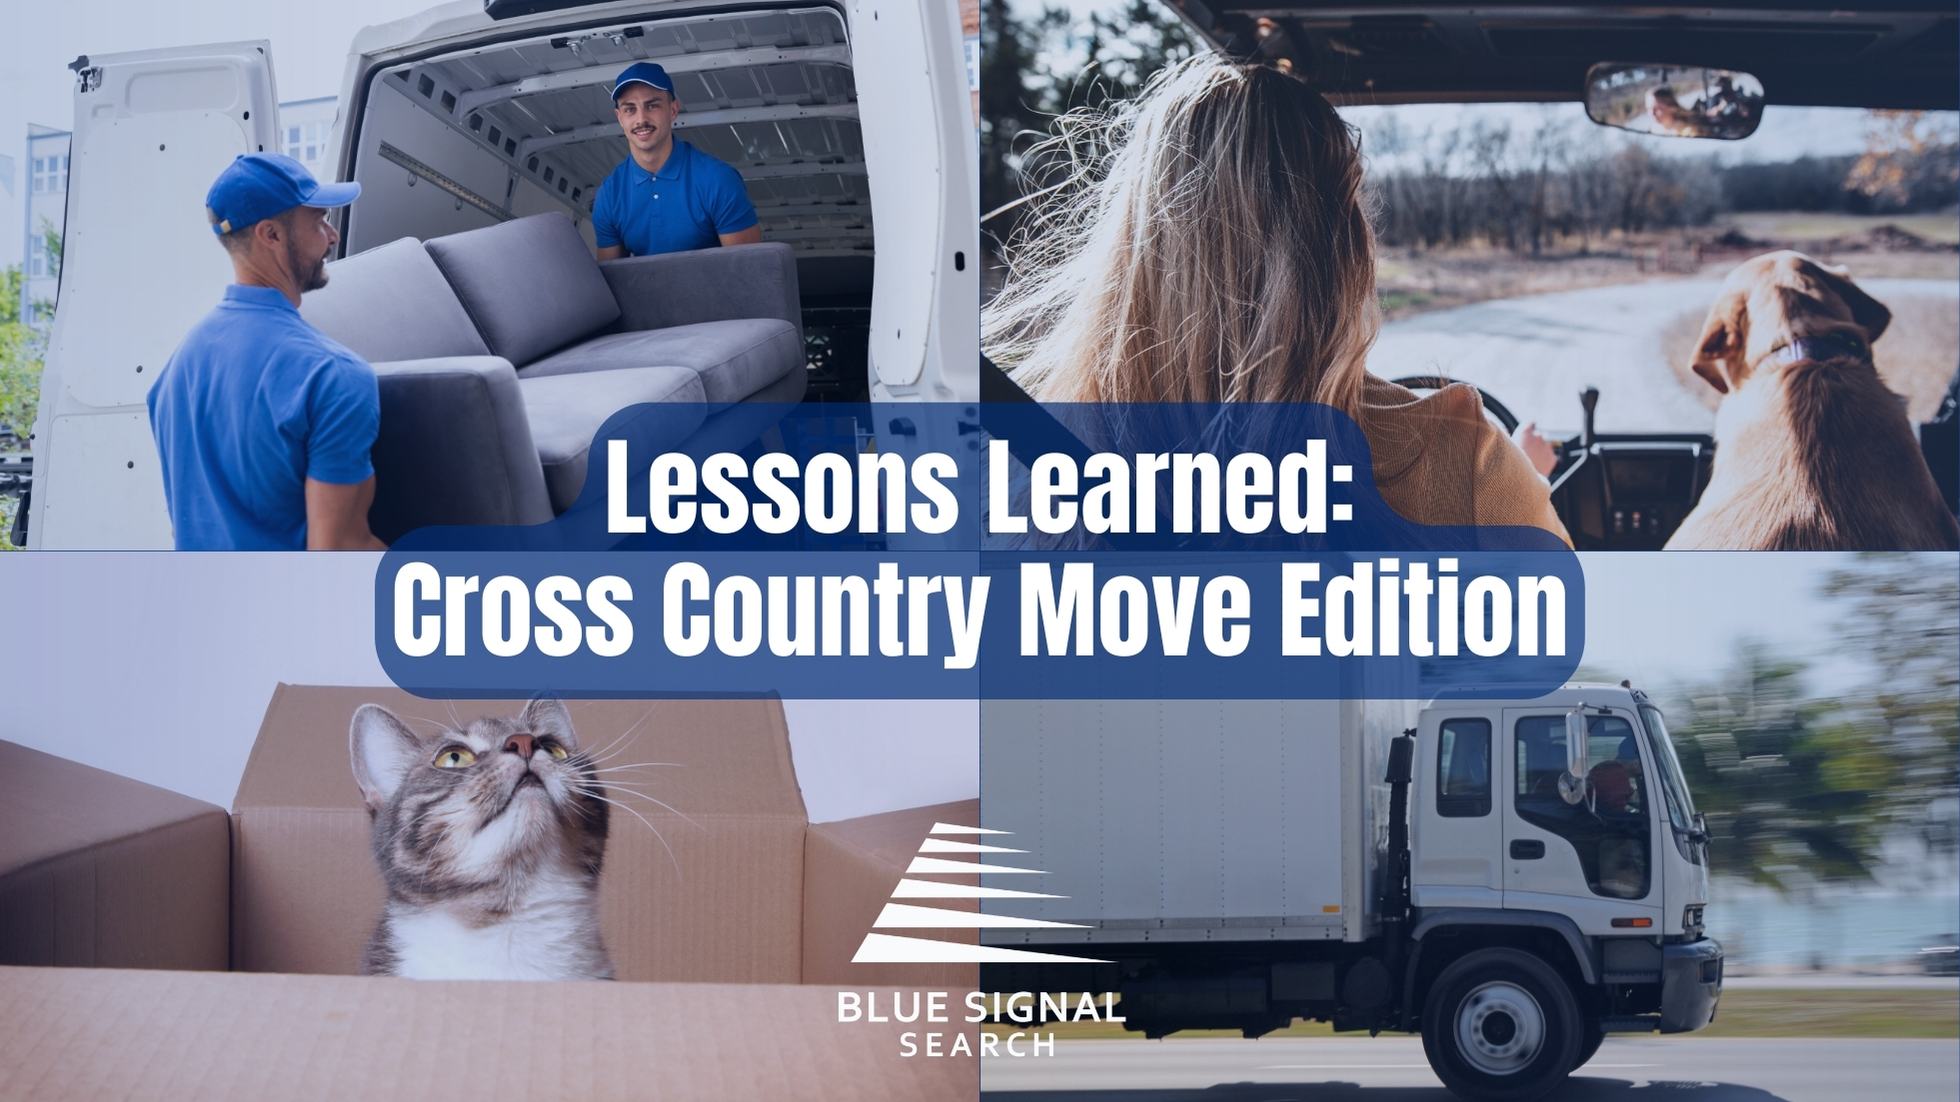 "A collage showing various aspects of moving: a mover loading a sofa into a truck, a dog looking out of a car window, a cat in a box, and a moving truck on the road, all with the Blue Signal Search logo.